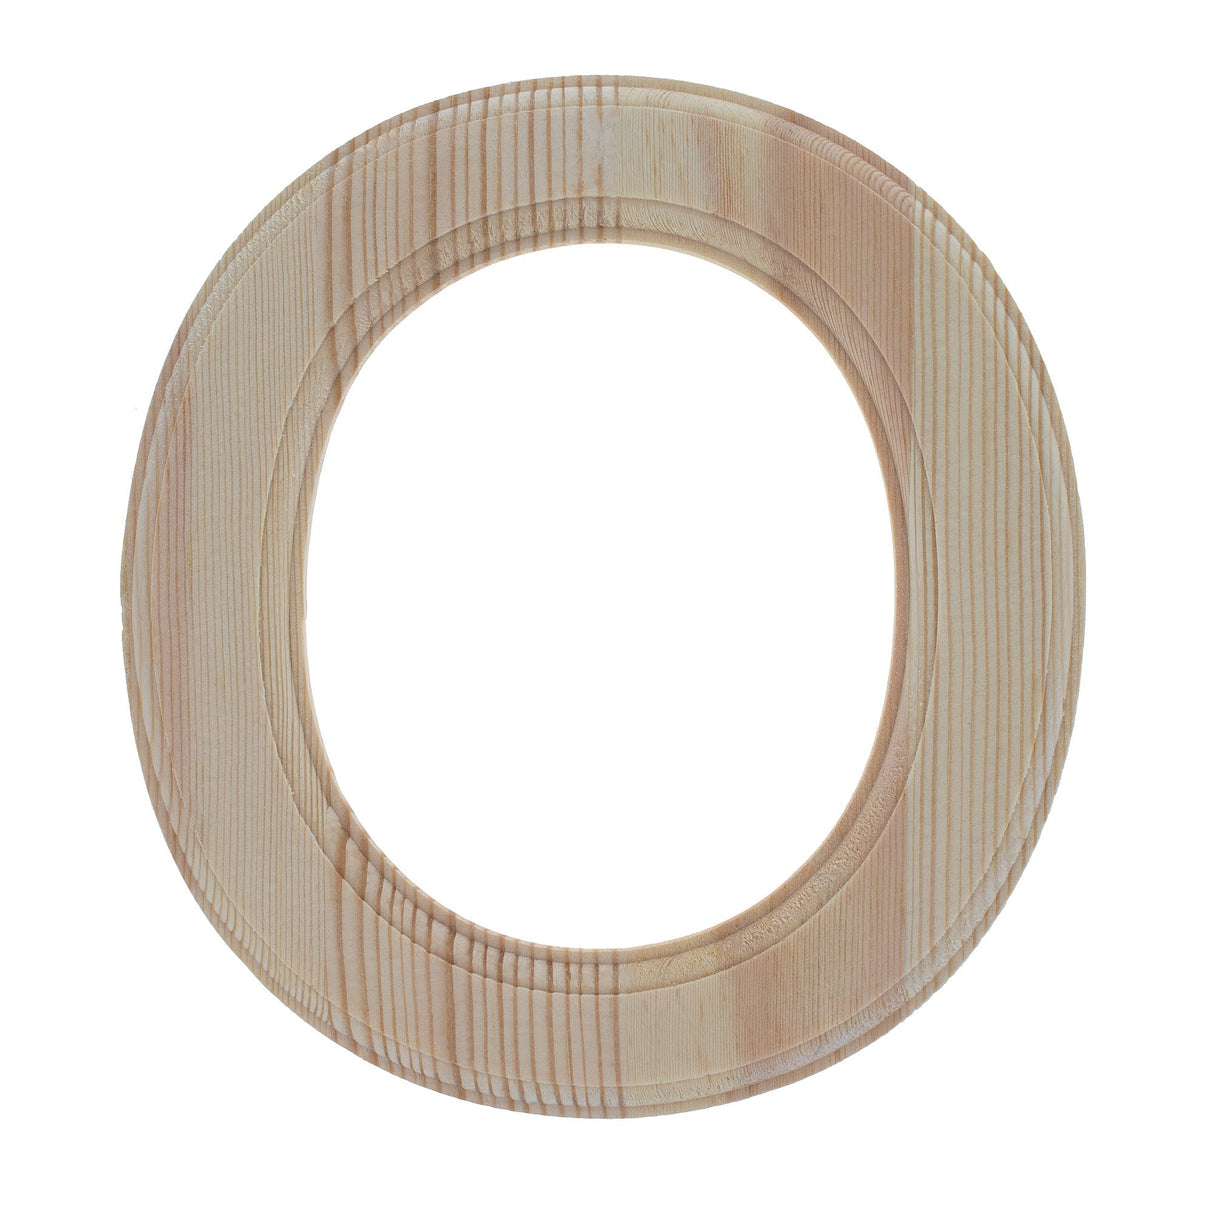 Unfinished Wooden Arial Font Letter O (6.25 Inches) in Beige color,  shape